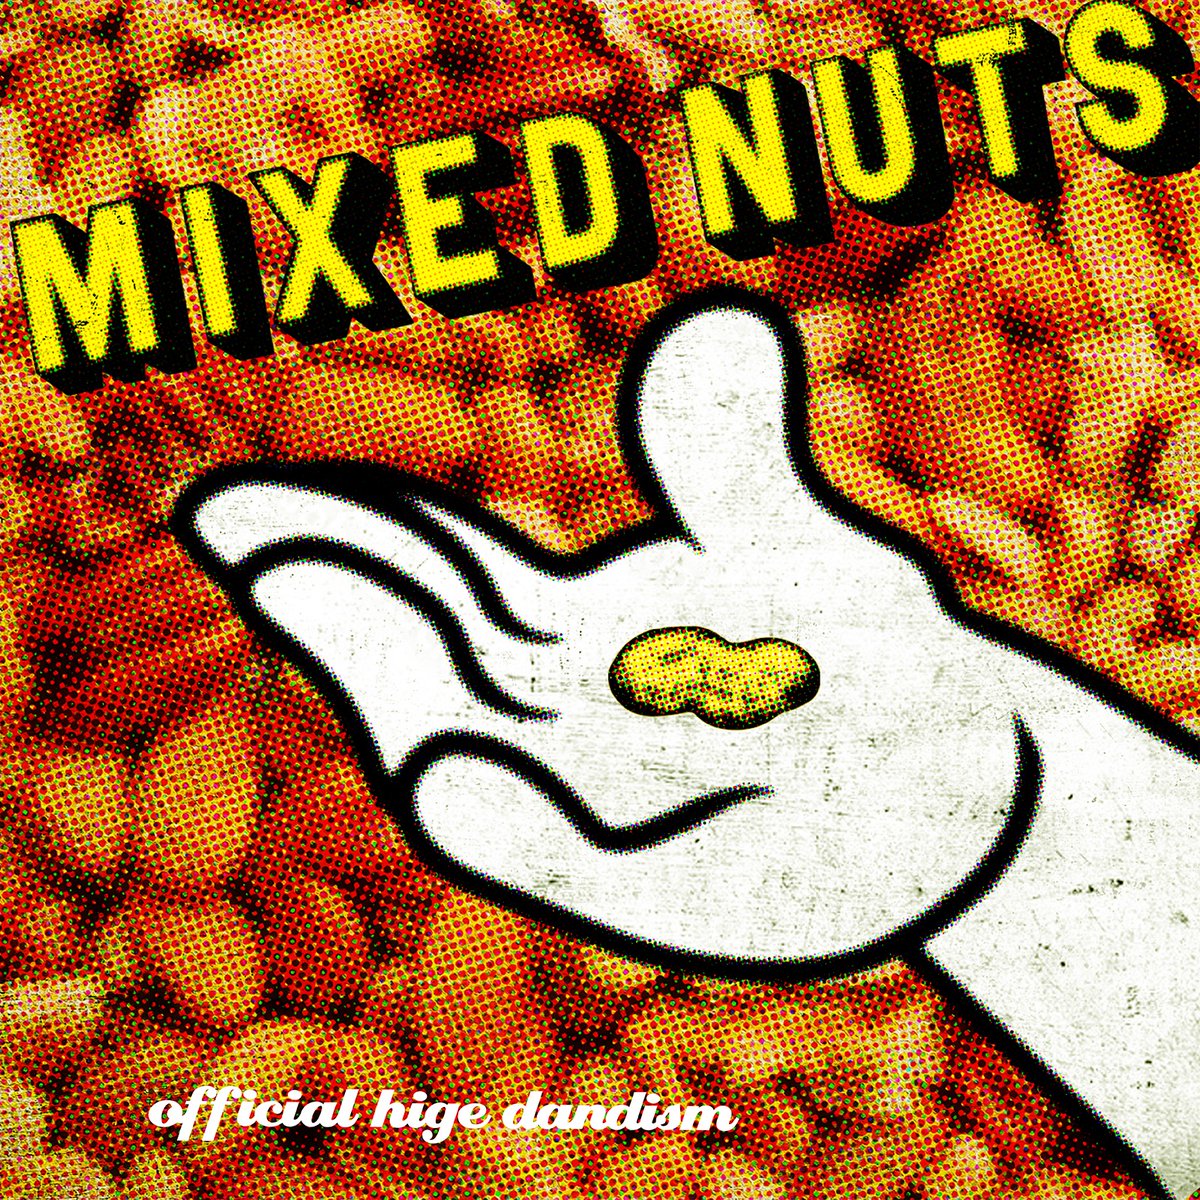 Cover art for『Official HIGE DANdism - ミックスナッツ』from the release『Mixed Nuts EP